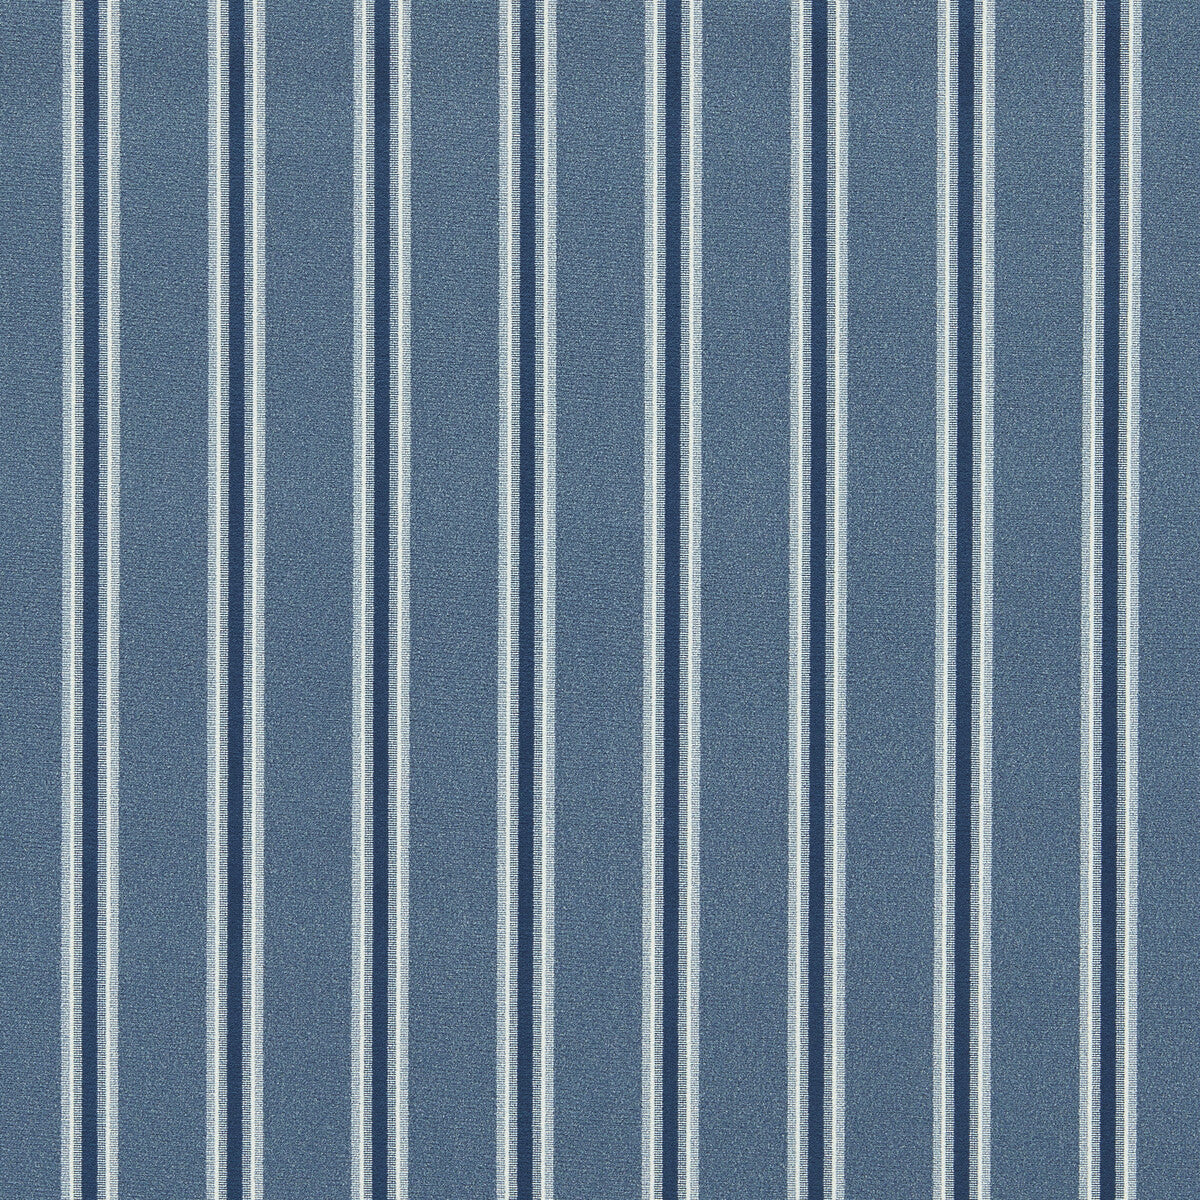 Bowfell fabric in indigo color - pattern F1689/05.CAC.0 - by Clarke And Clarke in the Whitworth collection